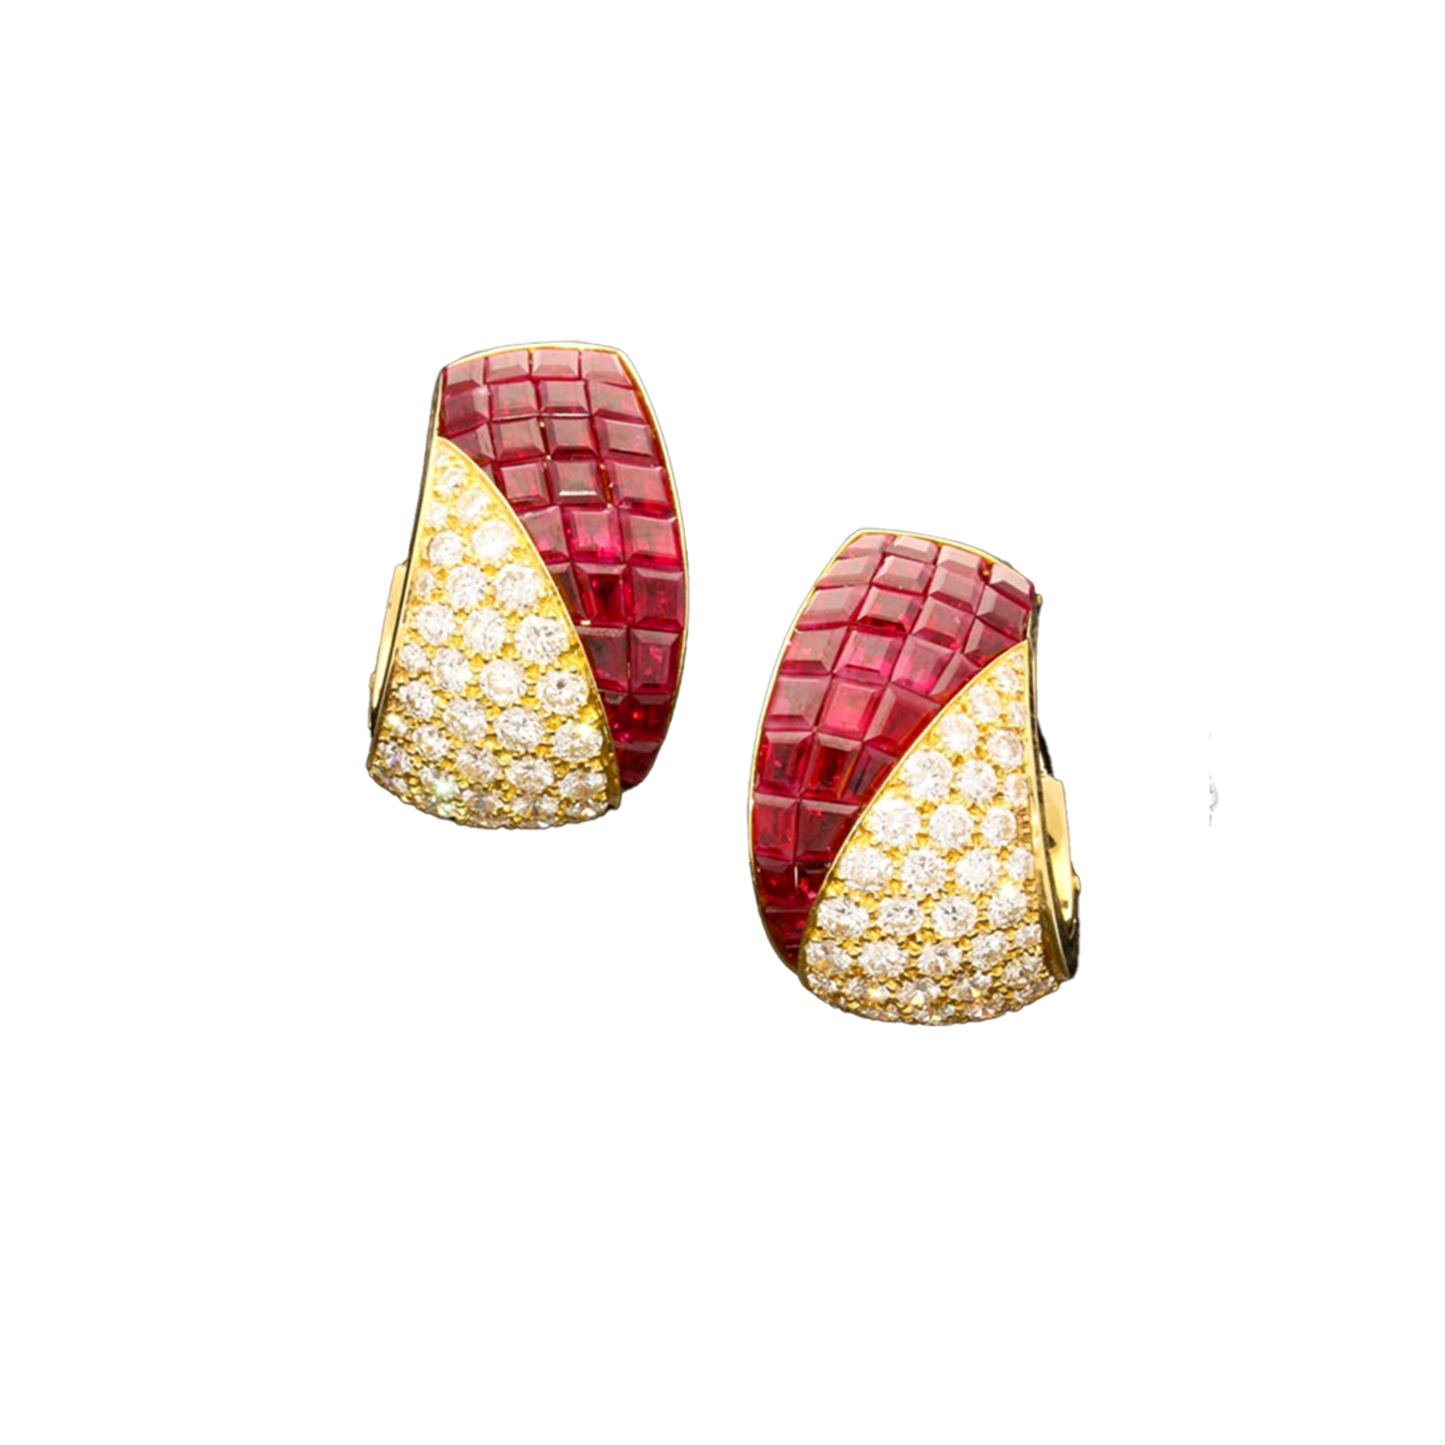 Van Cleef & Arpels 1980s 18KT Yellow Gold Ruby & Diamond Earrings front view